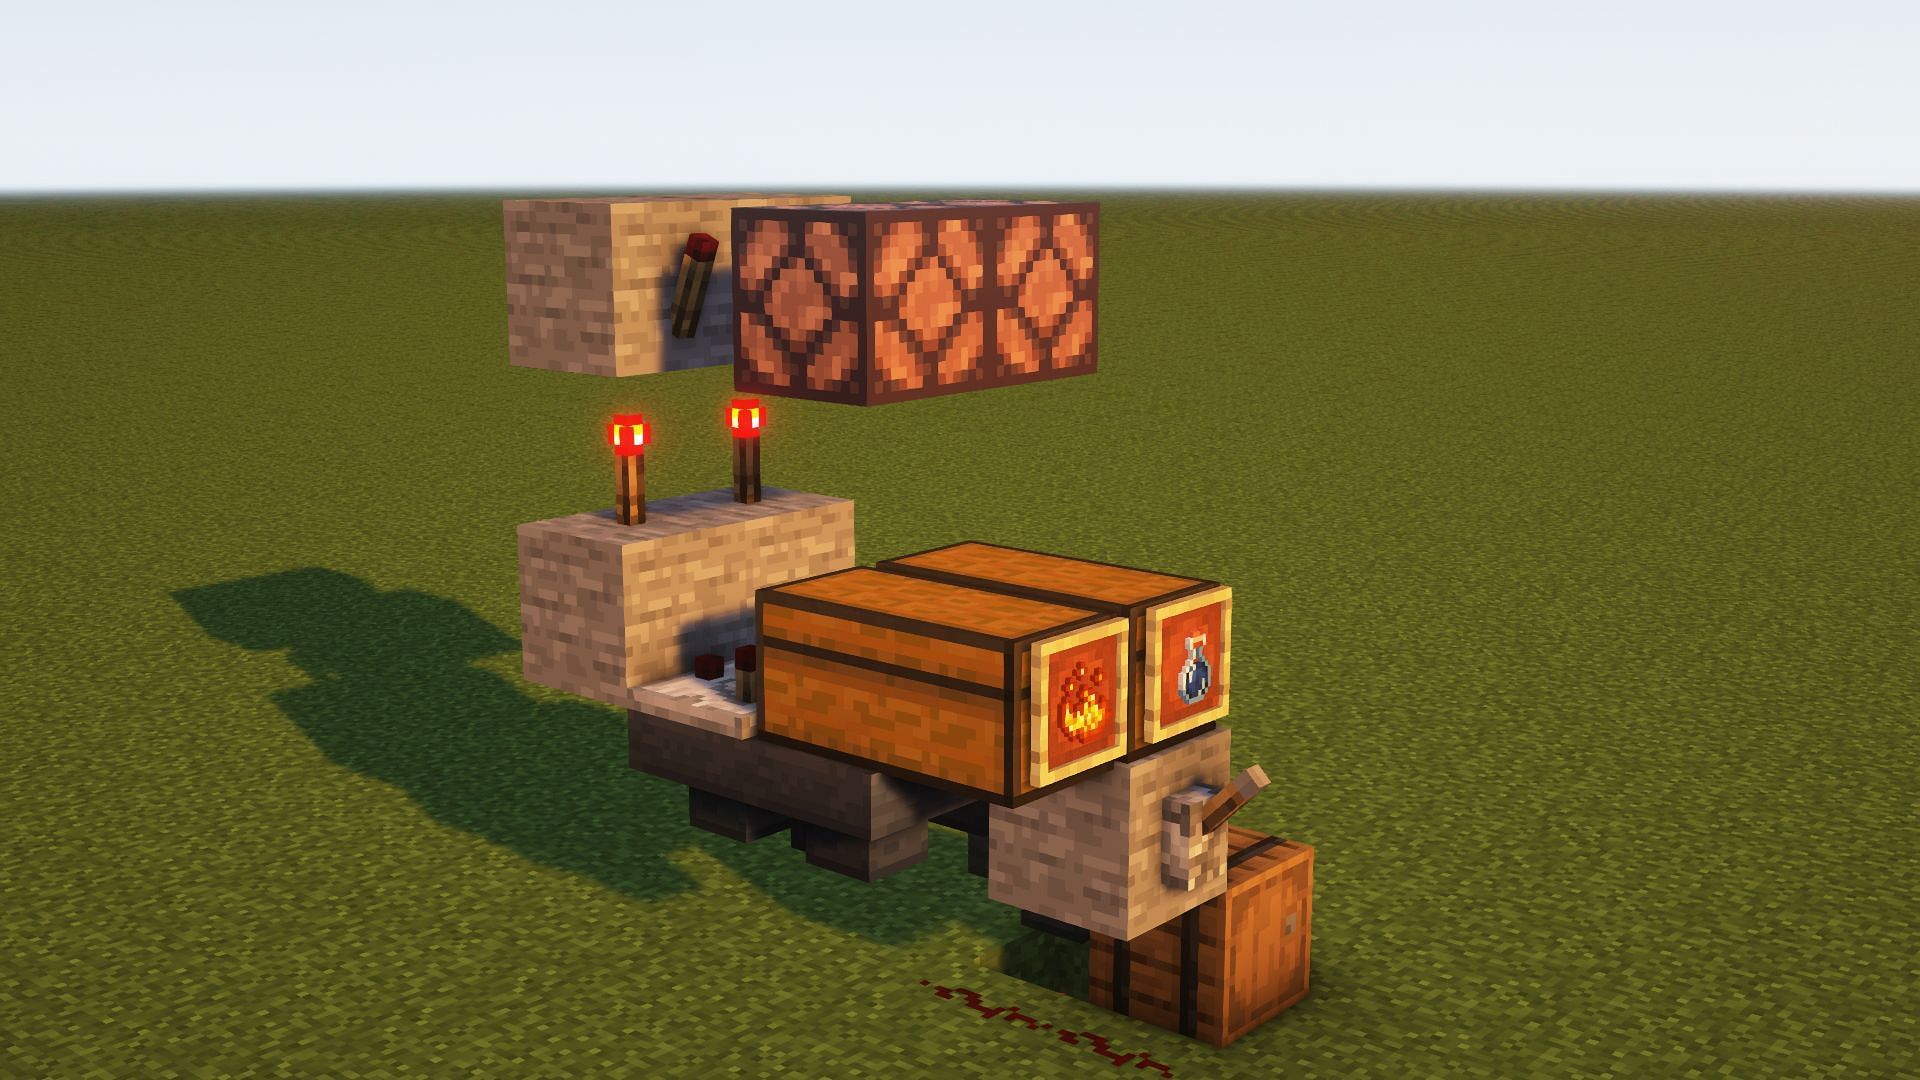 Making the redstone contraption in Minecraft (Image via Mojang)